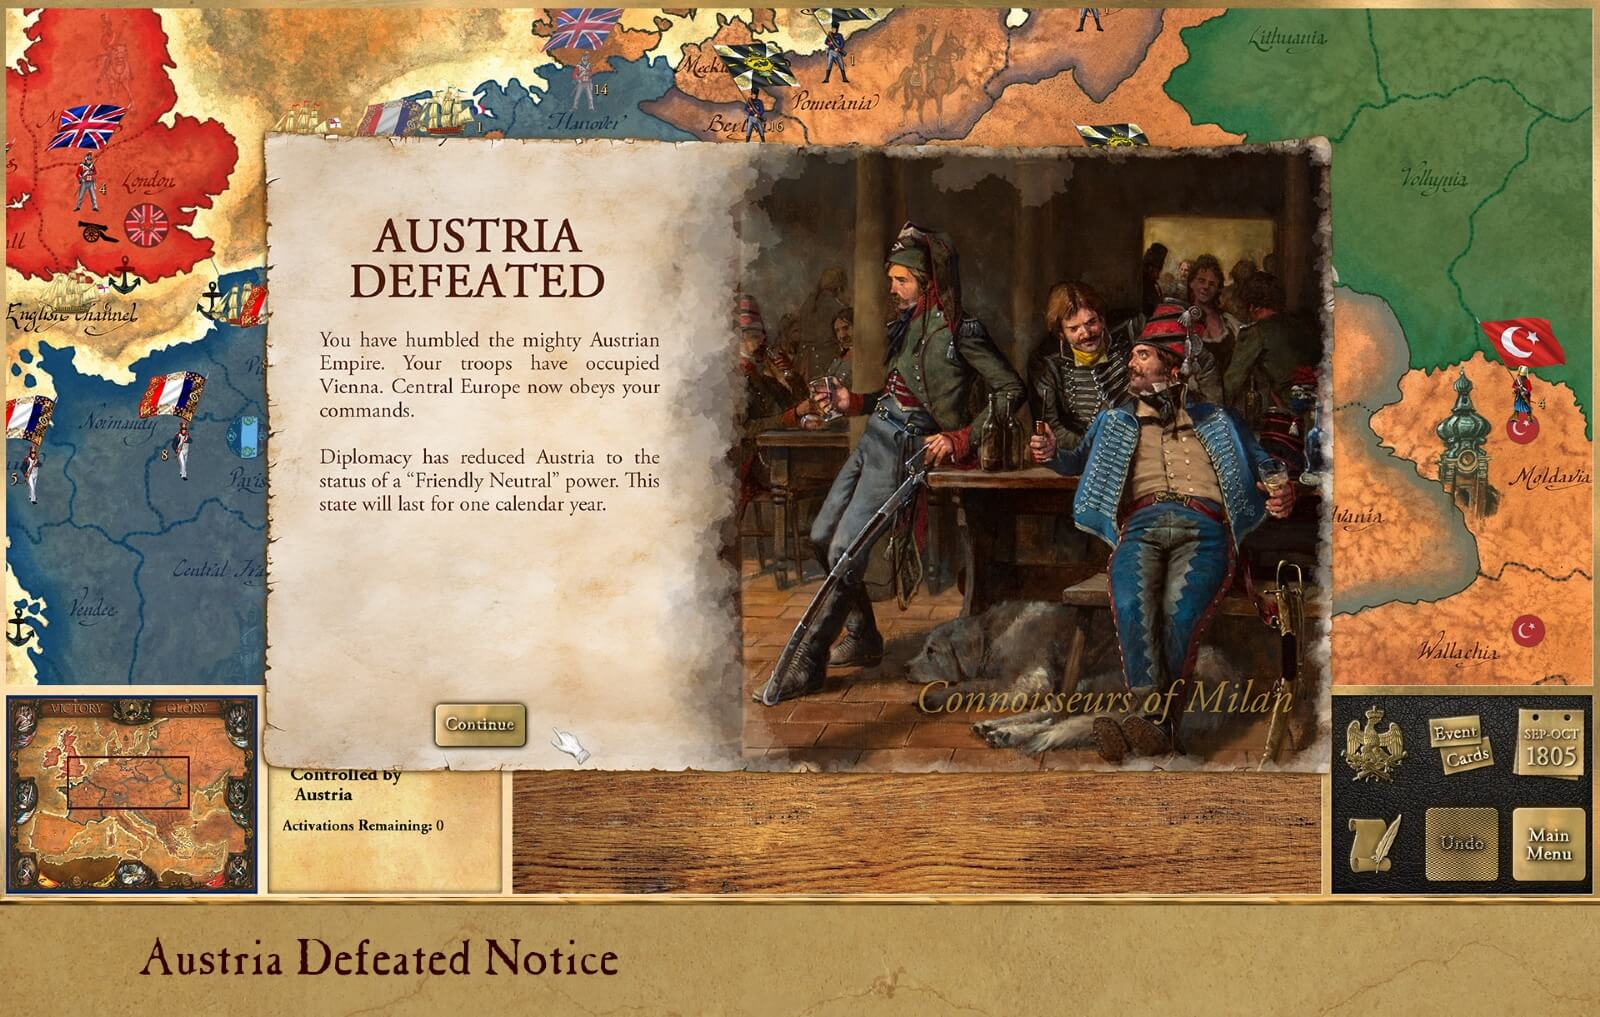 Austria defeated in Victory and Glory Napoleon